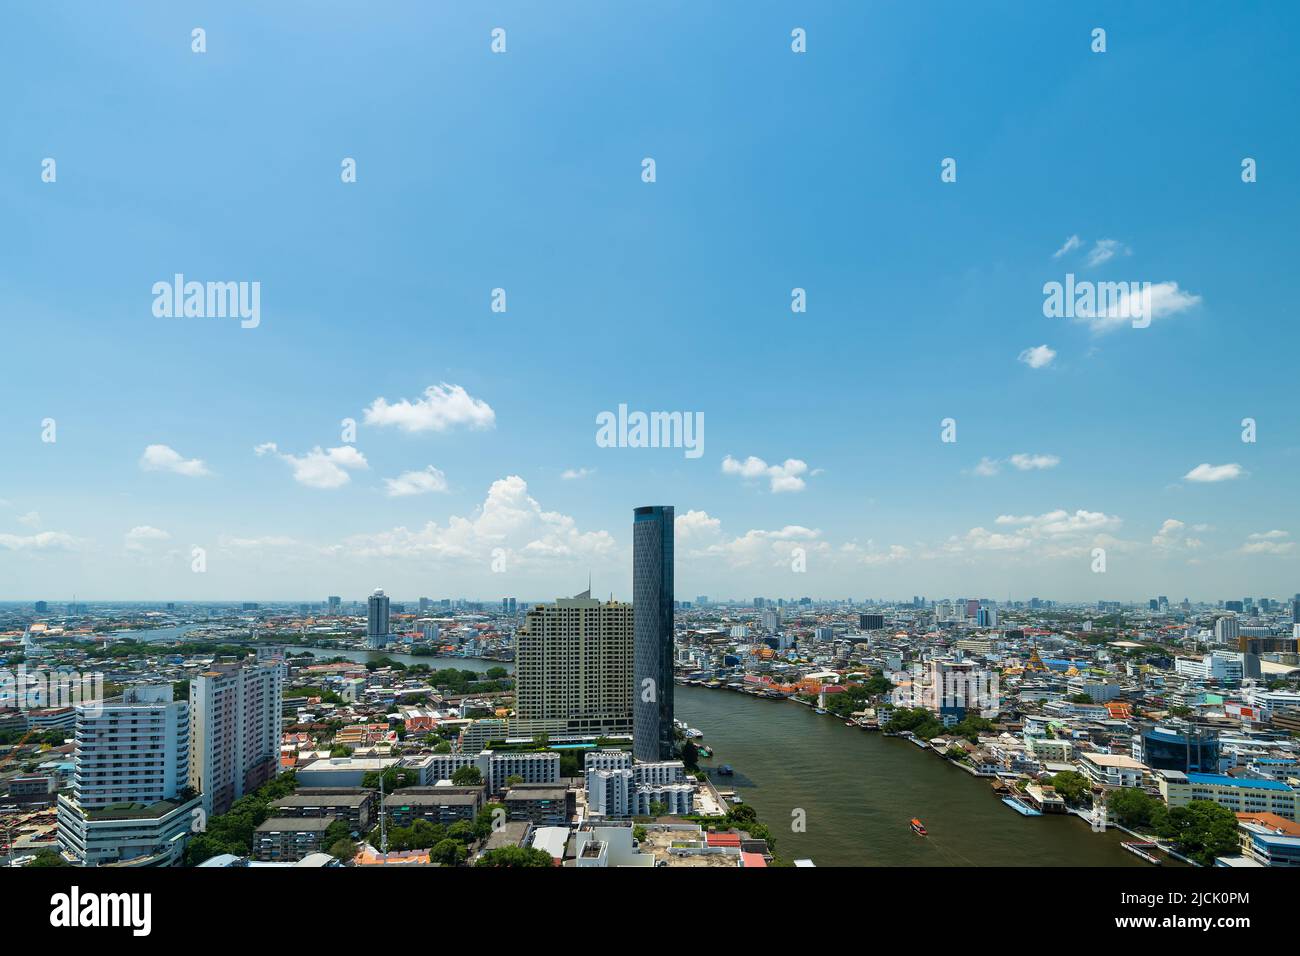 view of Chao Phraya River with building in Bangkok city, Thailand Stock Photo